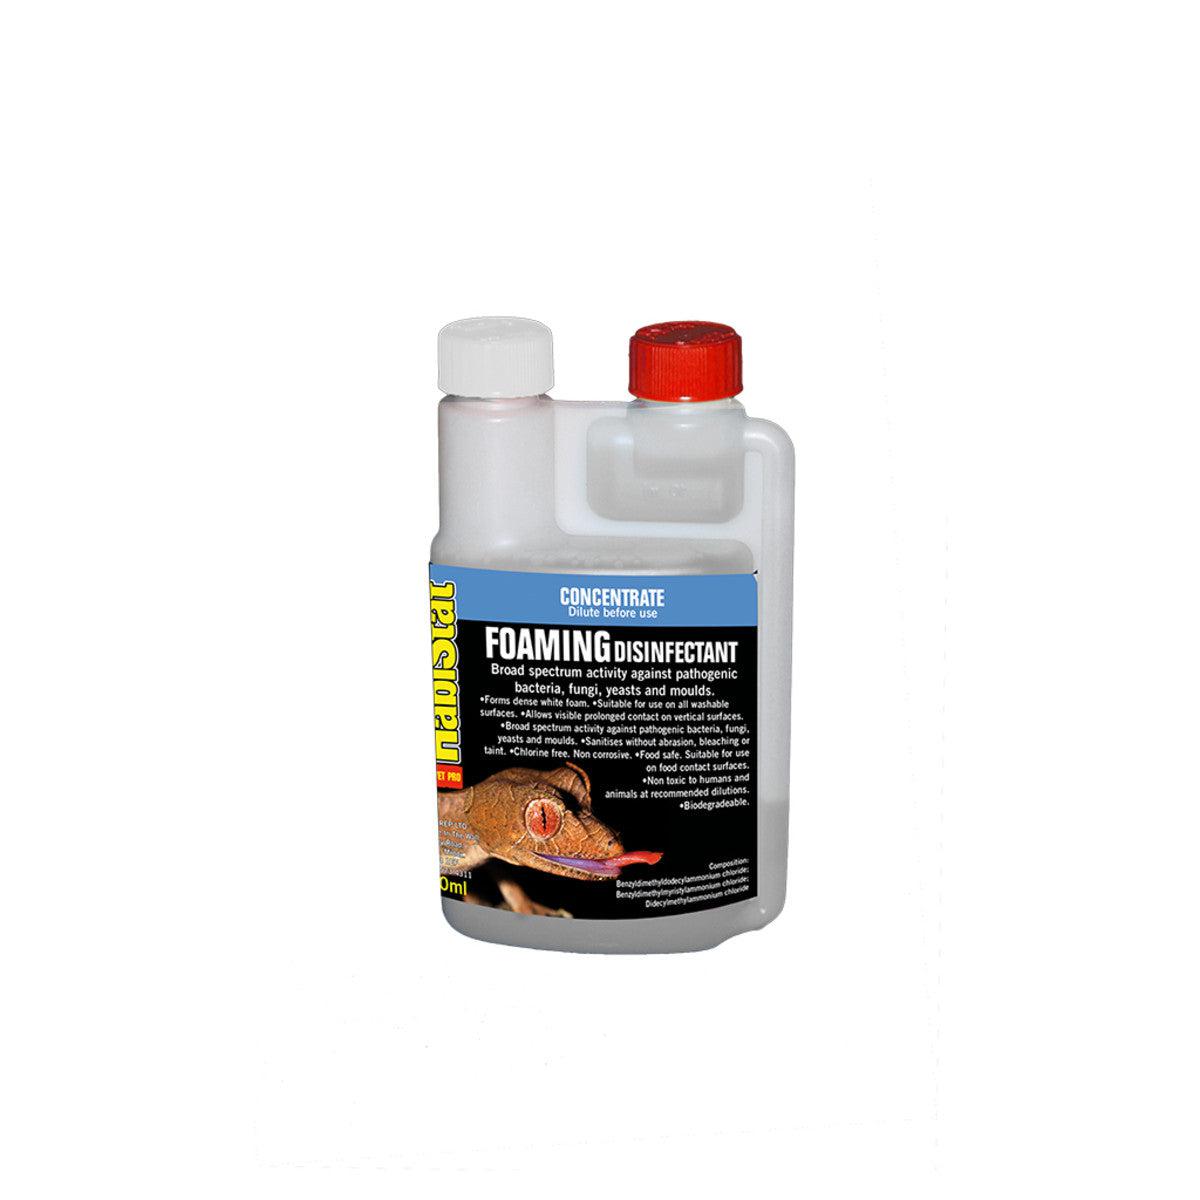 HabiStat Disinfectant Foam Cleaner Concentrate